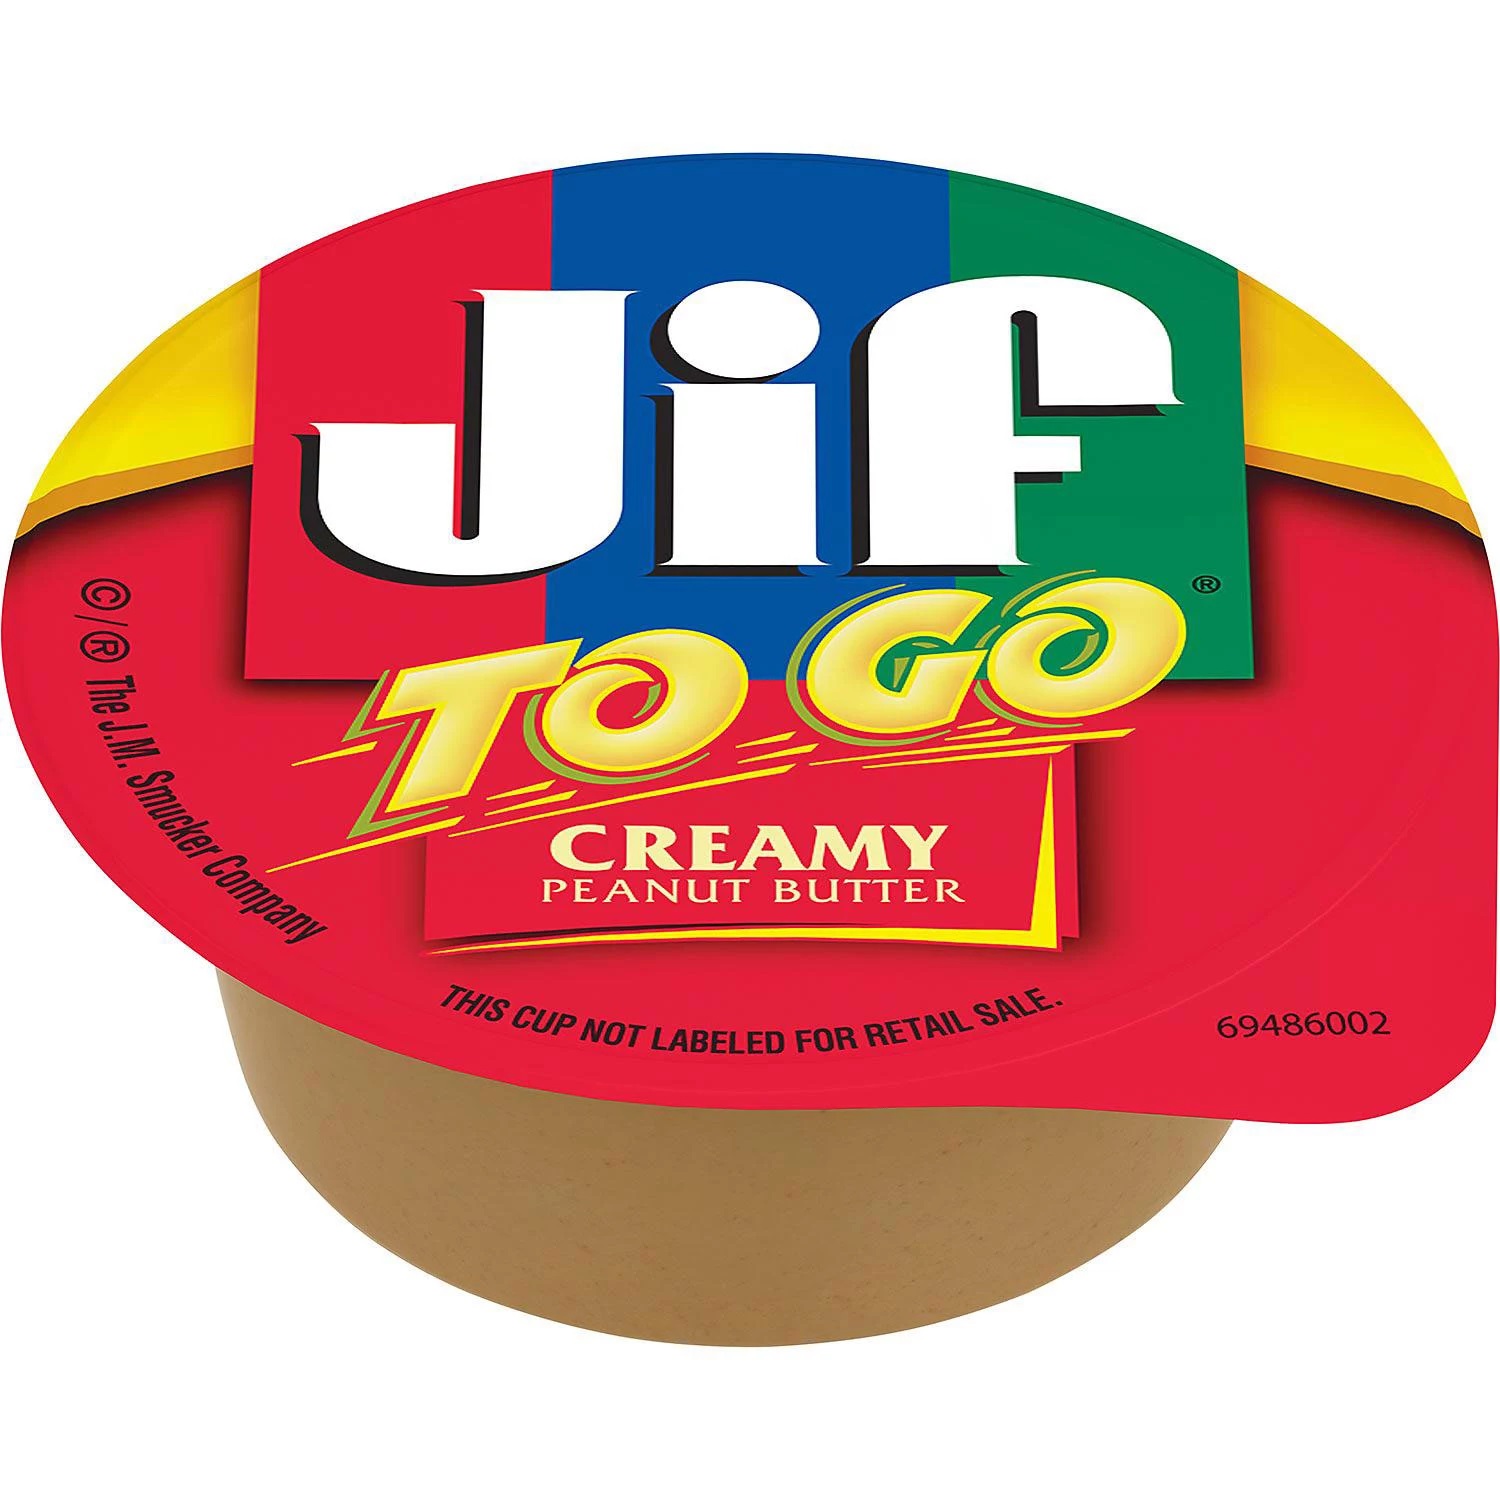 Jif-To-Go Creamy Peanut Butter (36 Count)